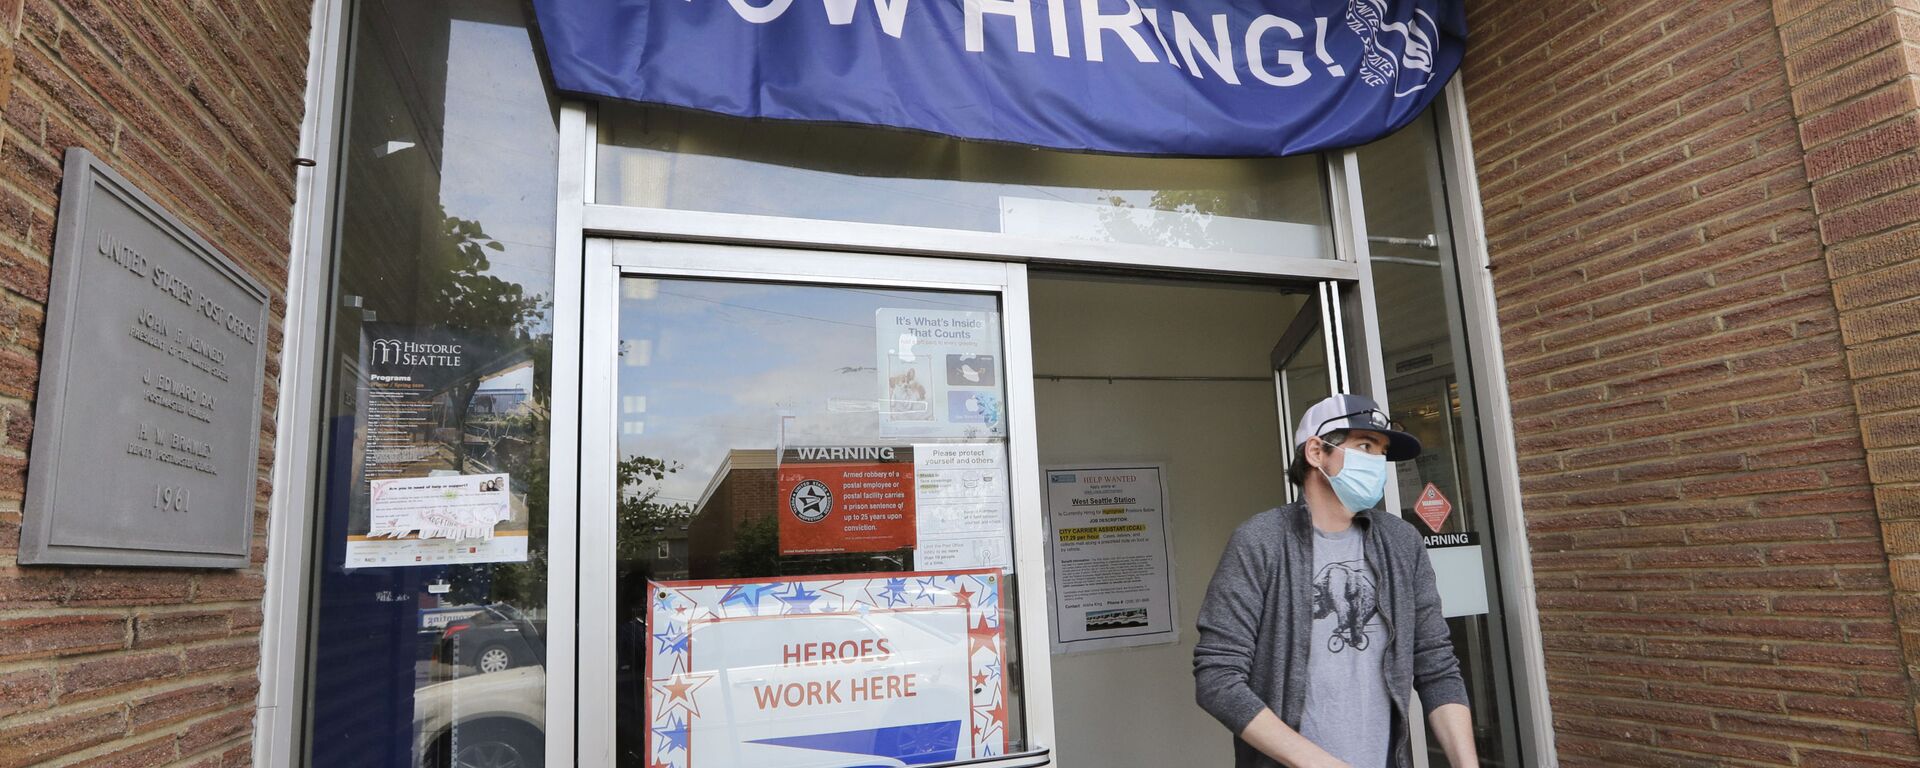 In this Thursday, June 4, 2020 file photo, a customer walks out of a U.S. Post Office branch and under a banner advertising a job opening, in Seattle. The job market took a big step toward healing in May 2020, though plenty of damage remains, as a record level of hiring followed record layoffs in March and April. The Labor Department reported Tuesday, July 7, 2020 that the number of available jobs rose sharply as well, but remained far below pre-pandemic levels.  - Sputnik International, 1920, 05.11.2021